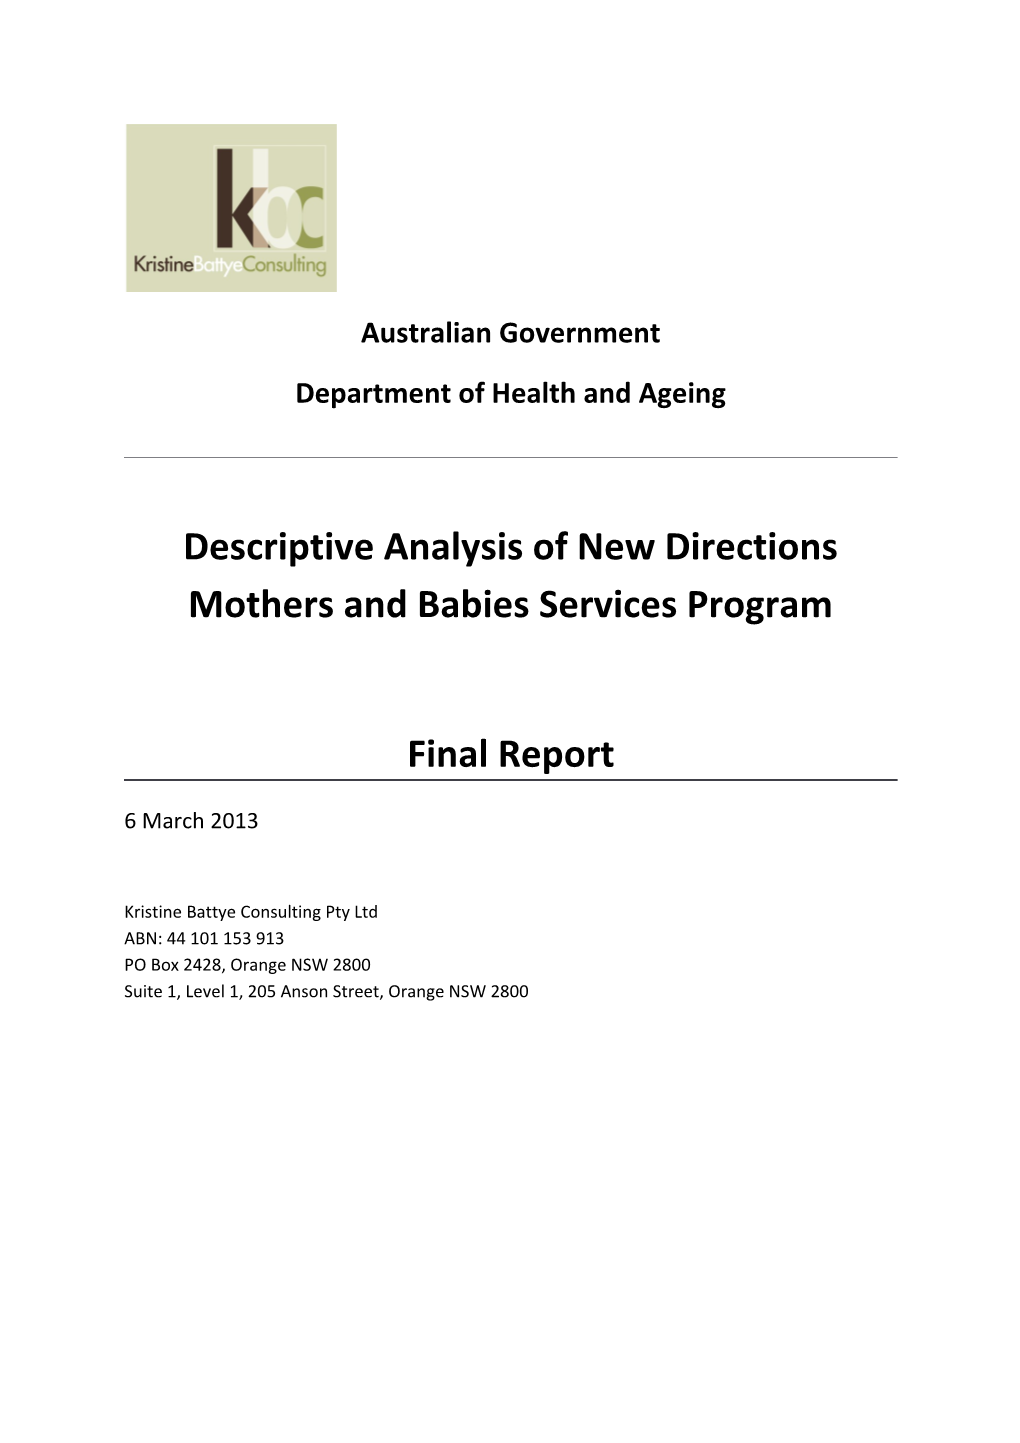 Descriptive Analysis of New Directions Mothers and Babies Services Program - Final Report